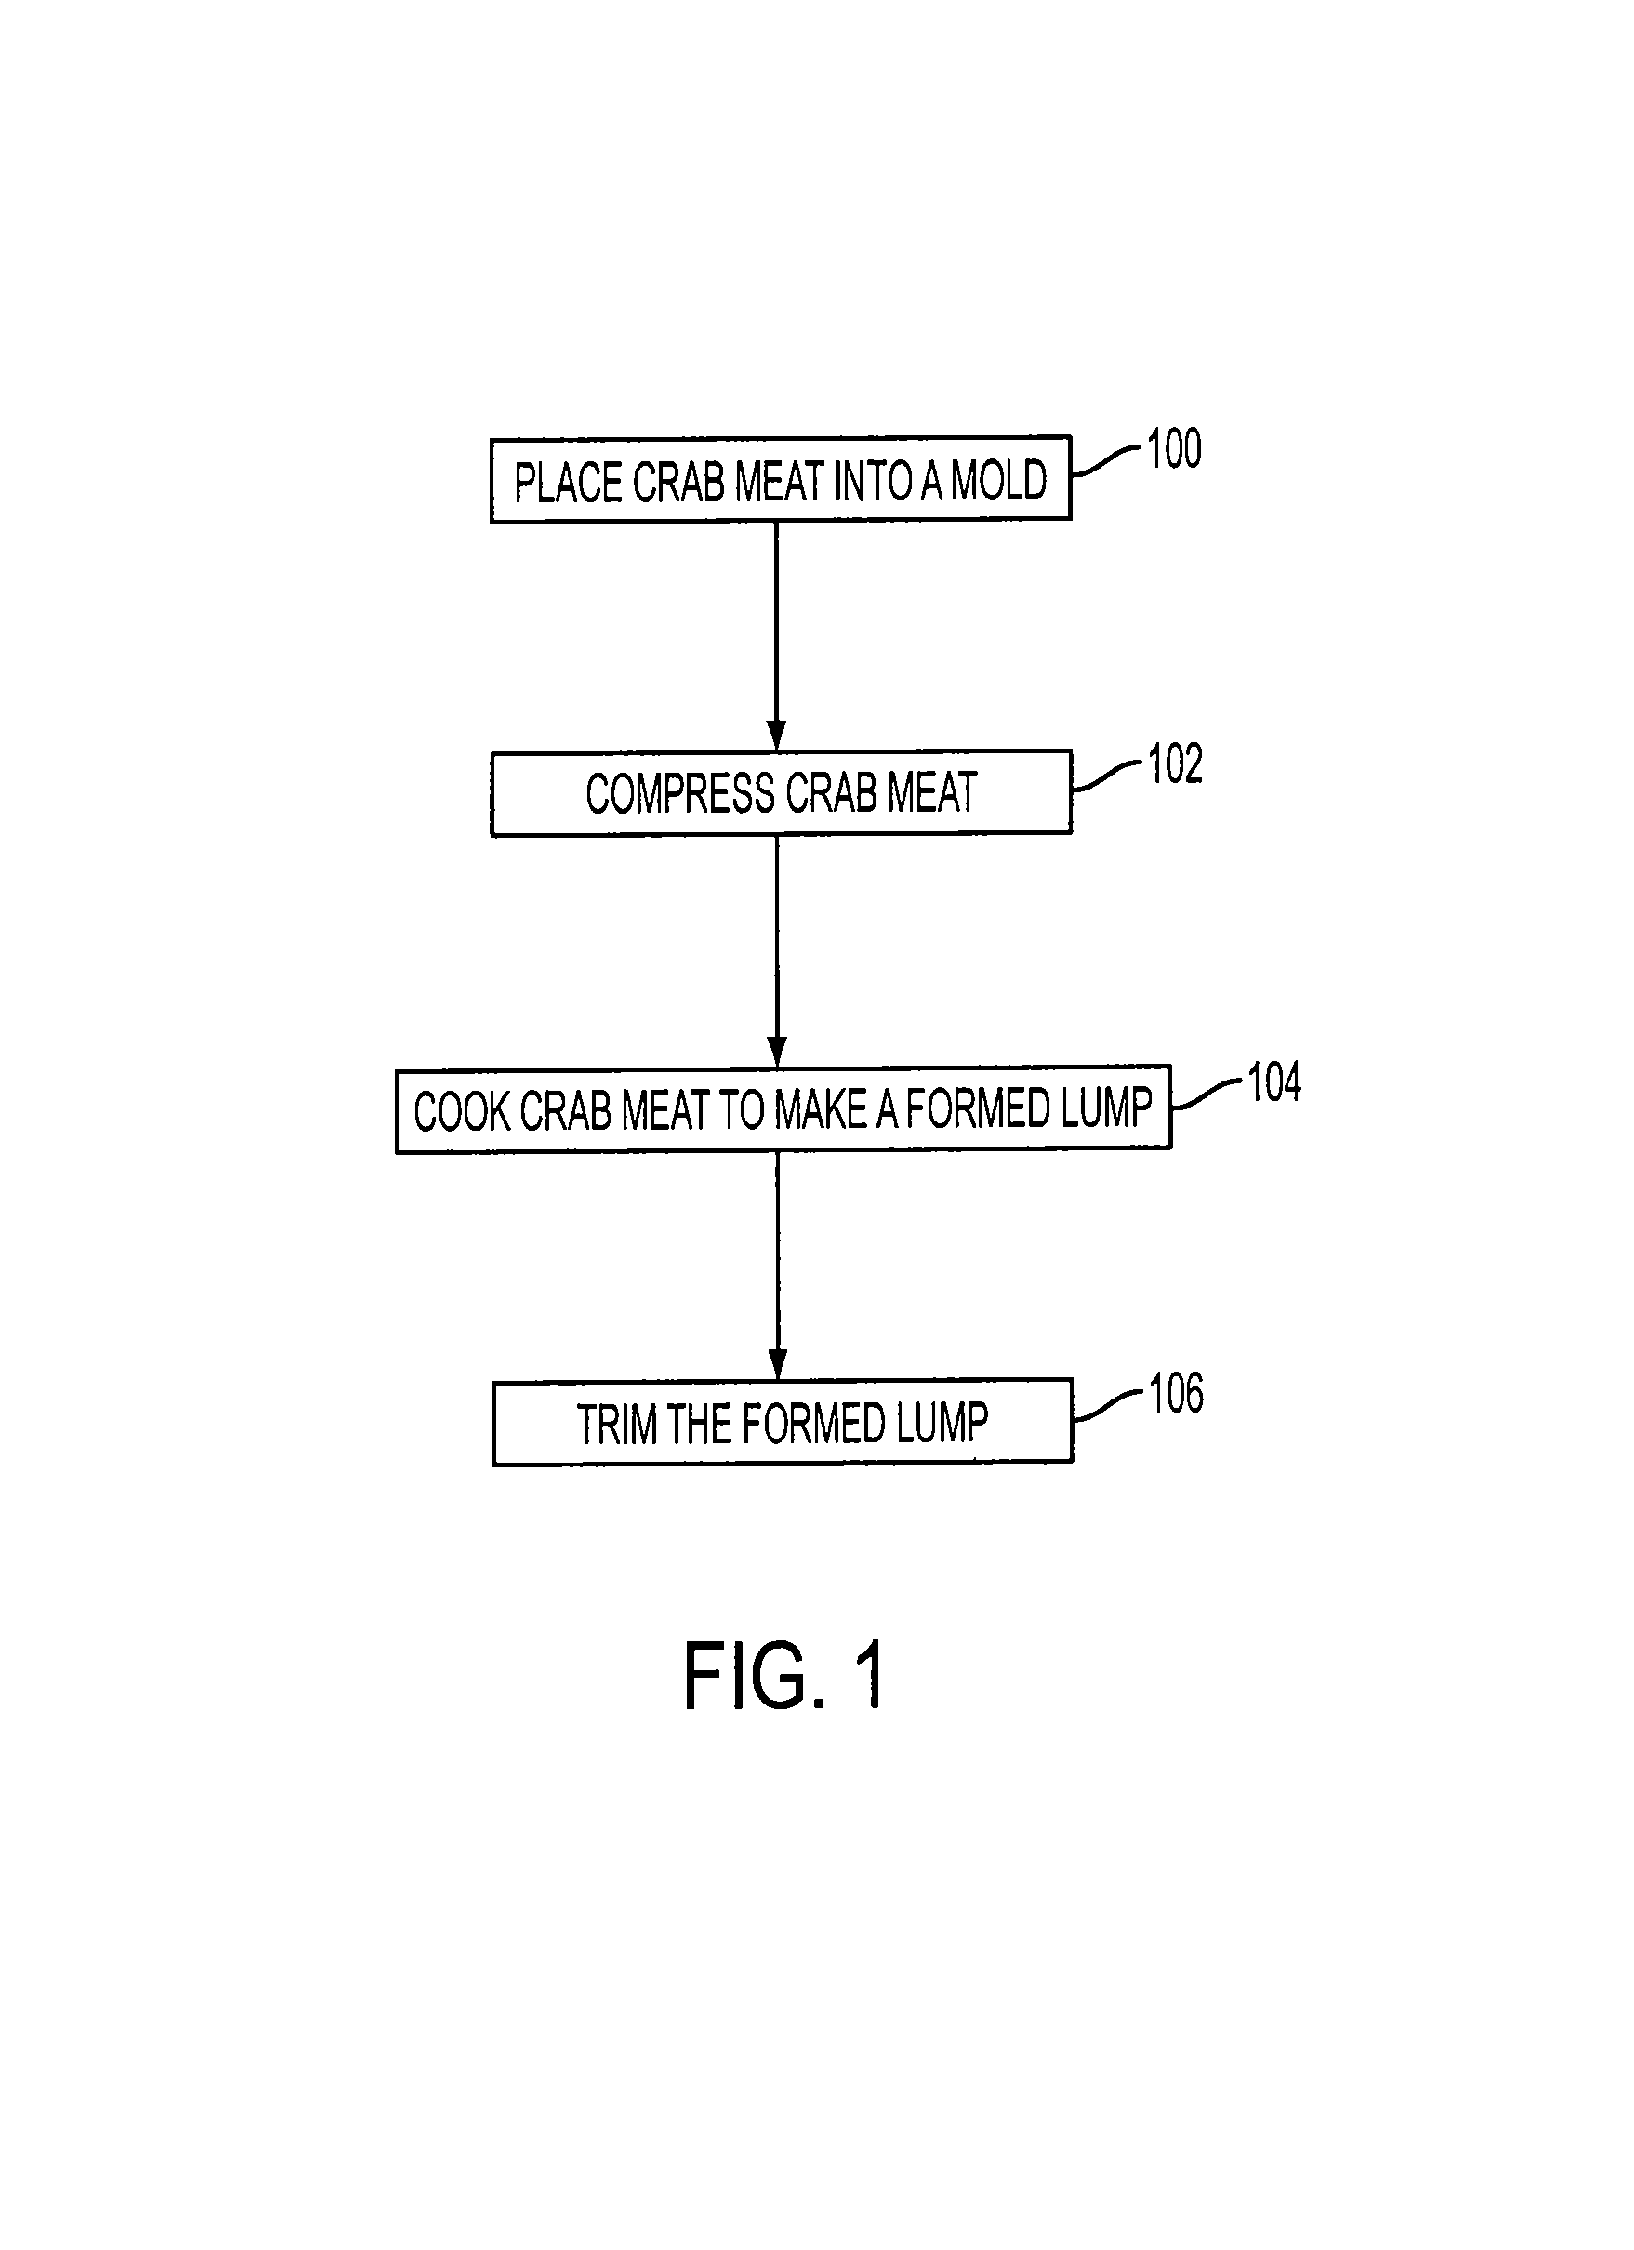 Method for manufacturing formed lumps of meat